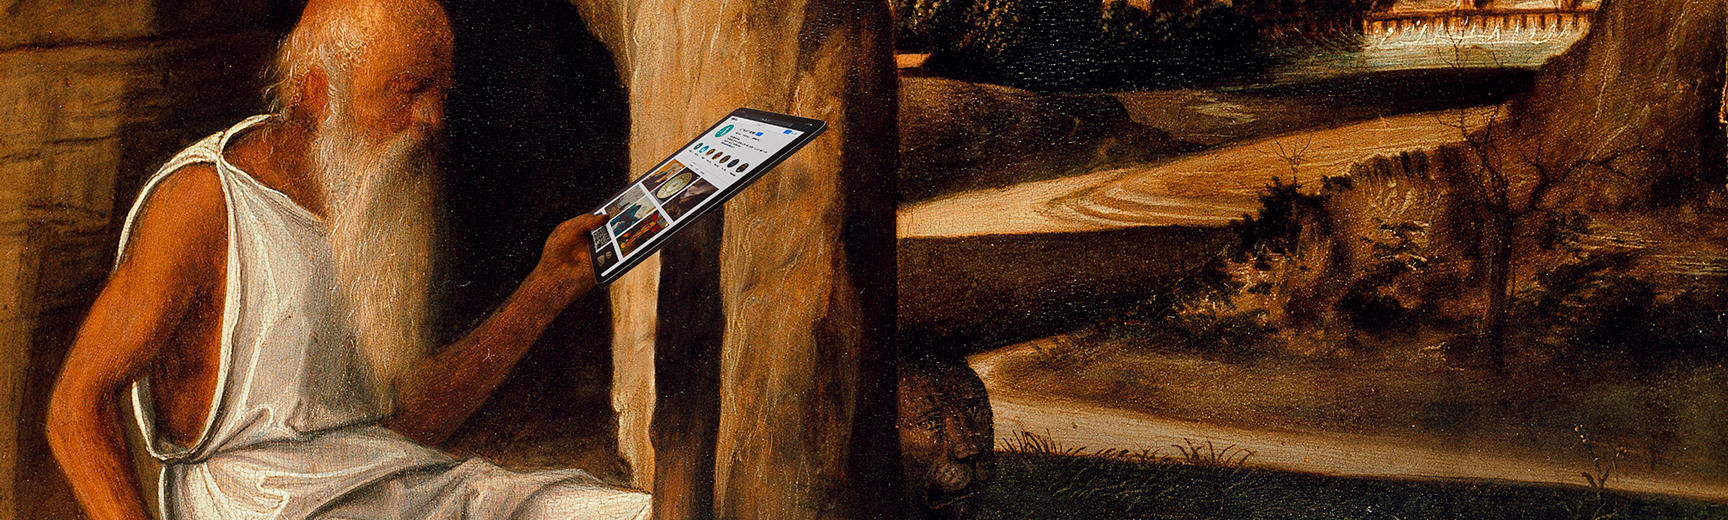 landscape detail st jerome reading in a landscape by giovanni bellini with a tablet ashmolean museum wa1899 cdef p1